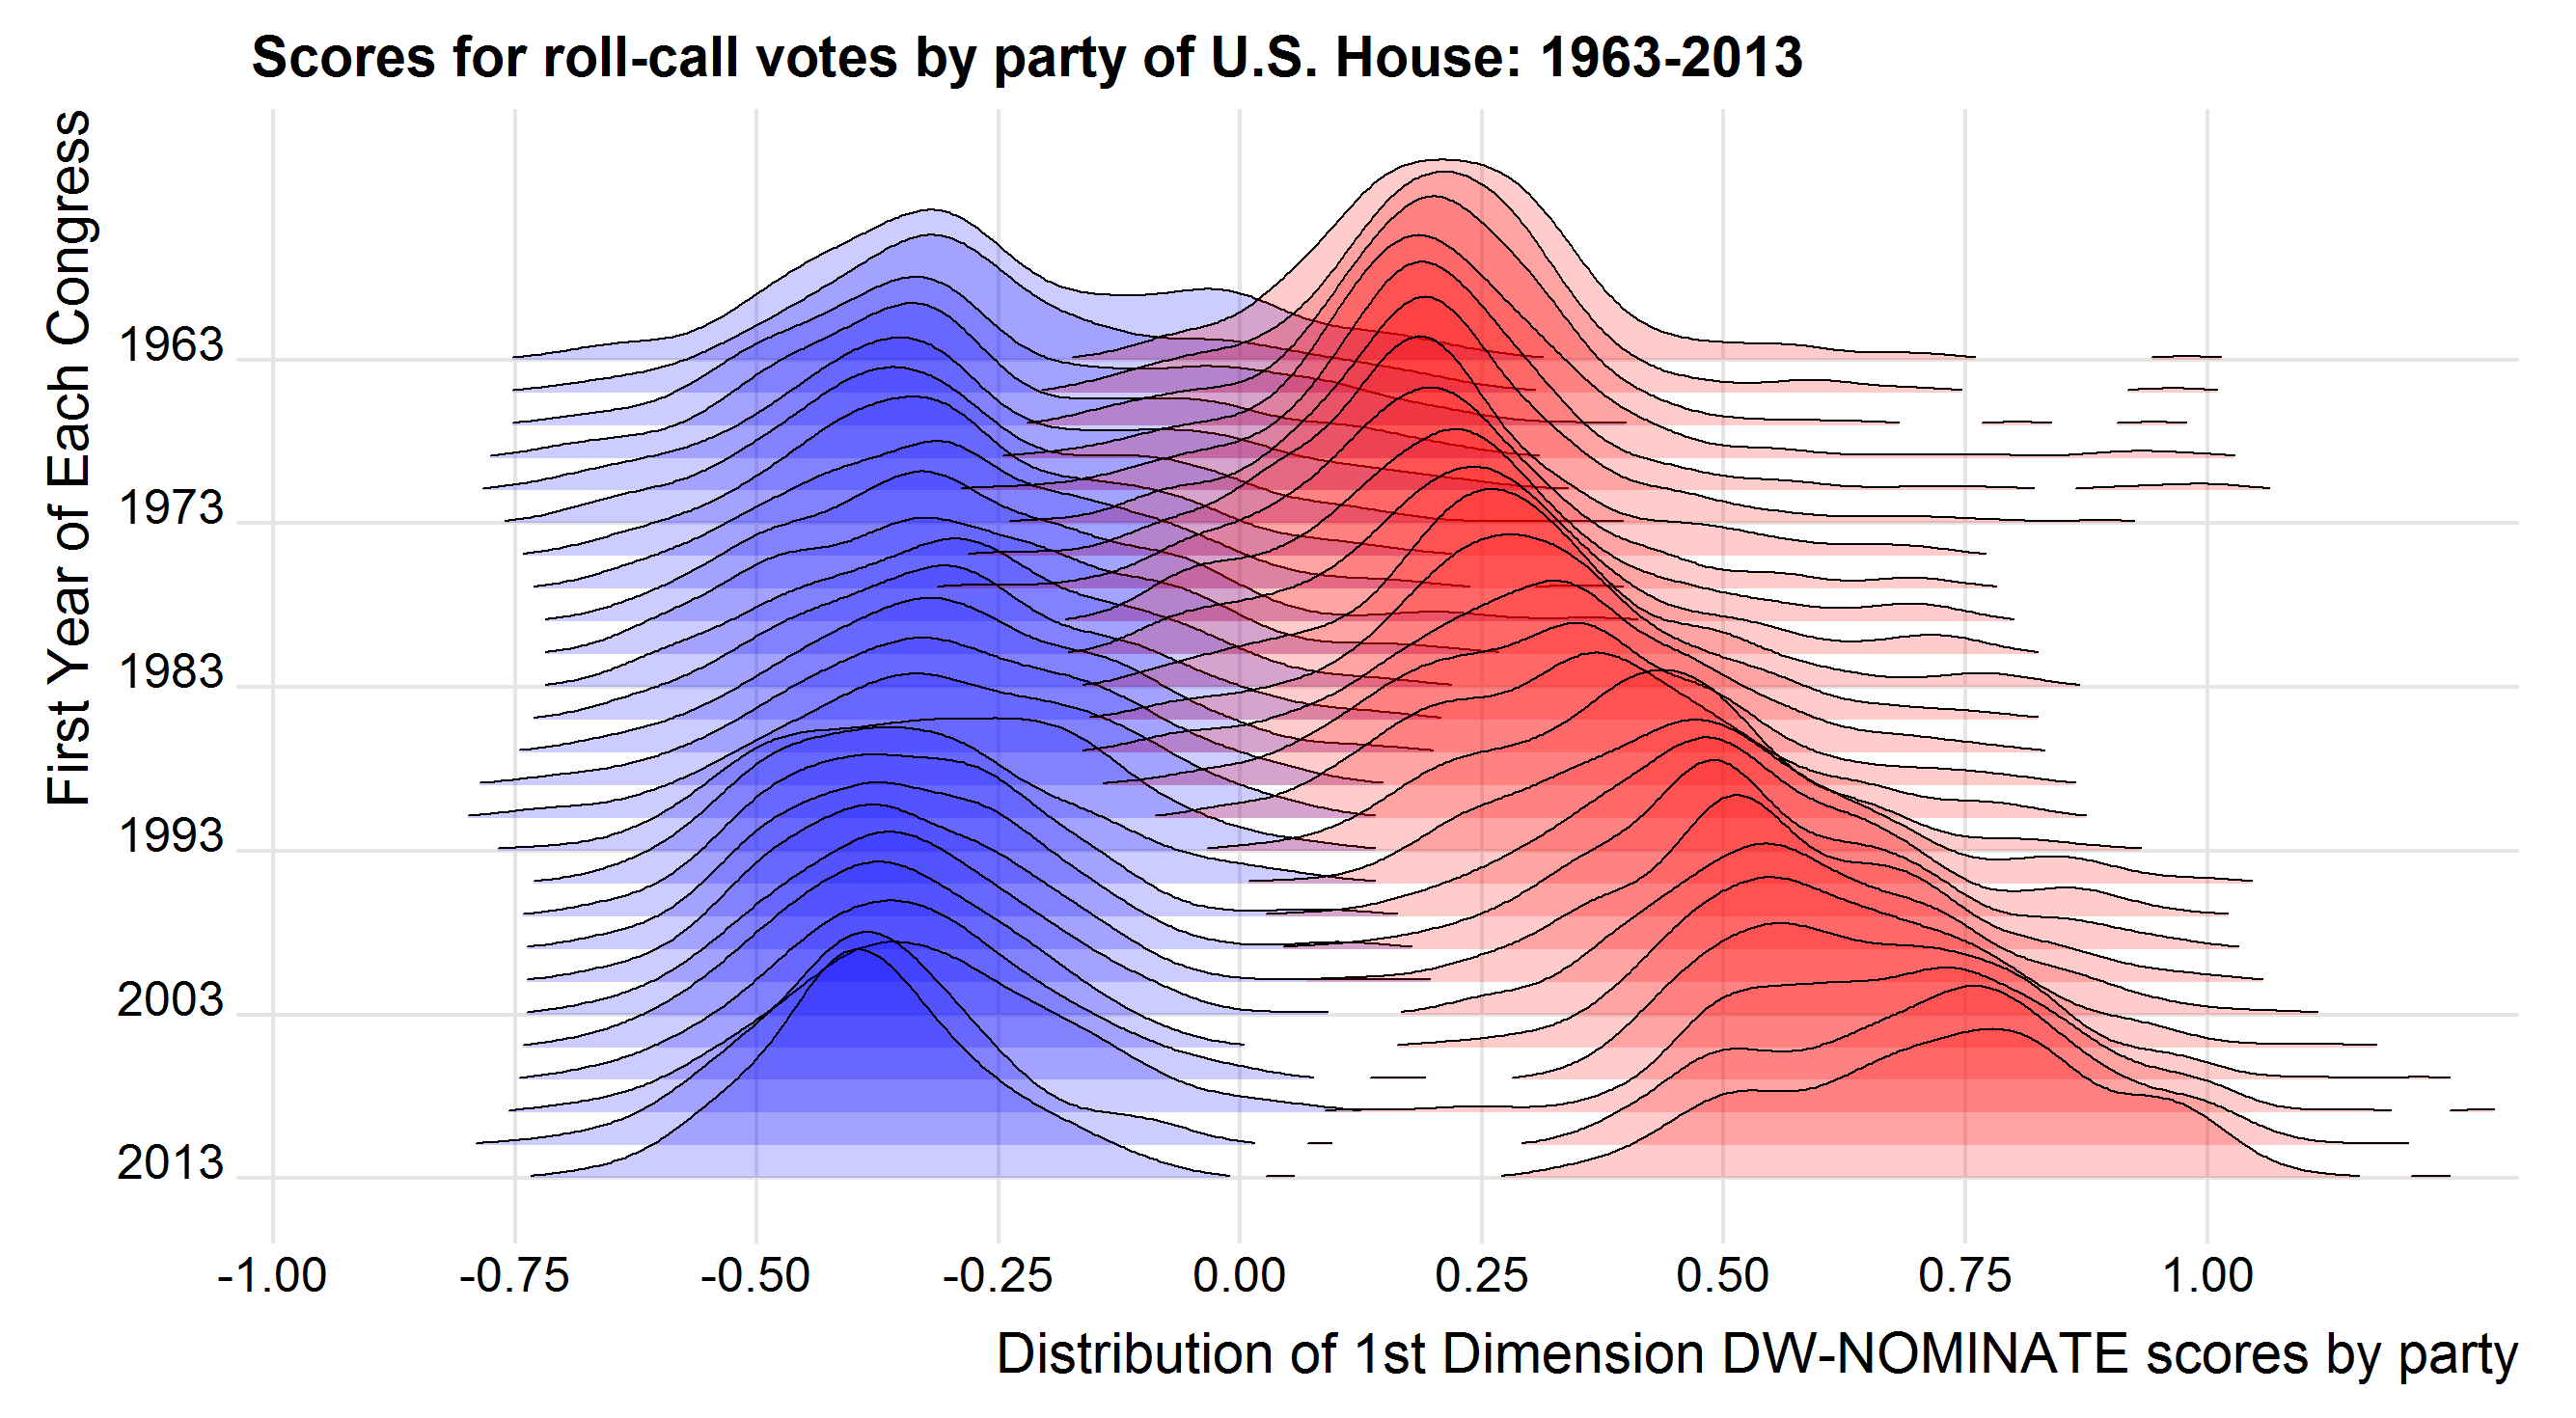 Polarization of politics: Ridgeline plot showing the increasing polarization of U.S. House of Representatives and Senate in the Democratic (left, blue) and Republican (right, red) parties from 1963 to 2013.